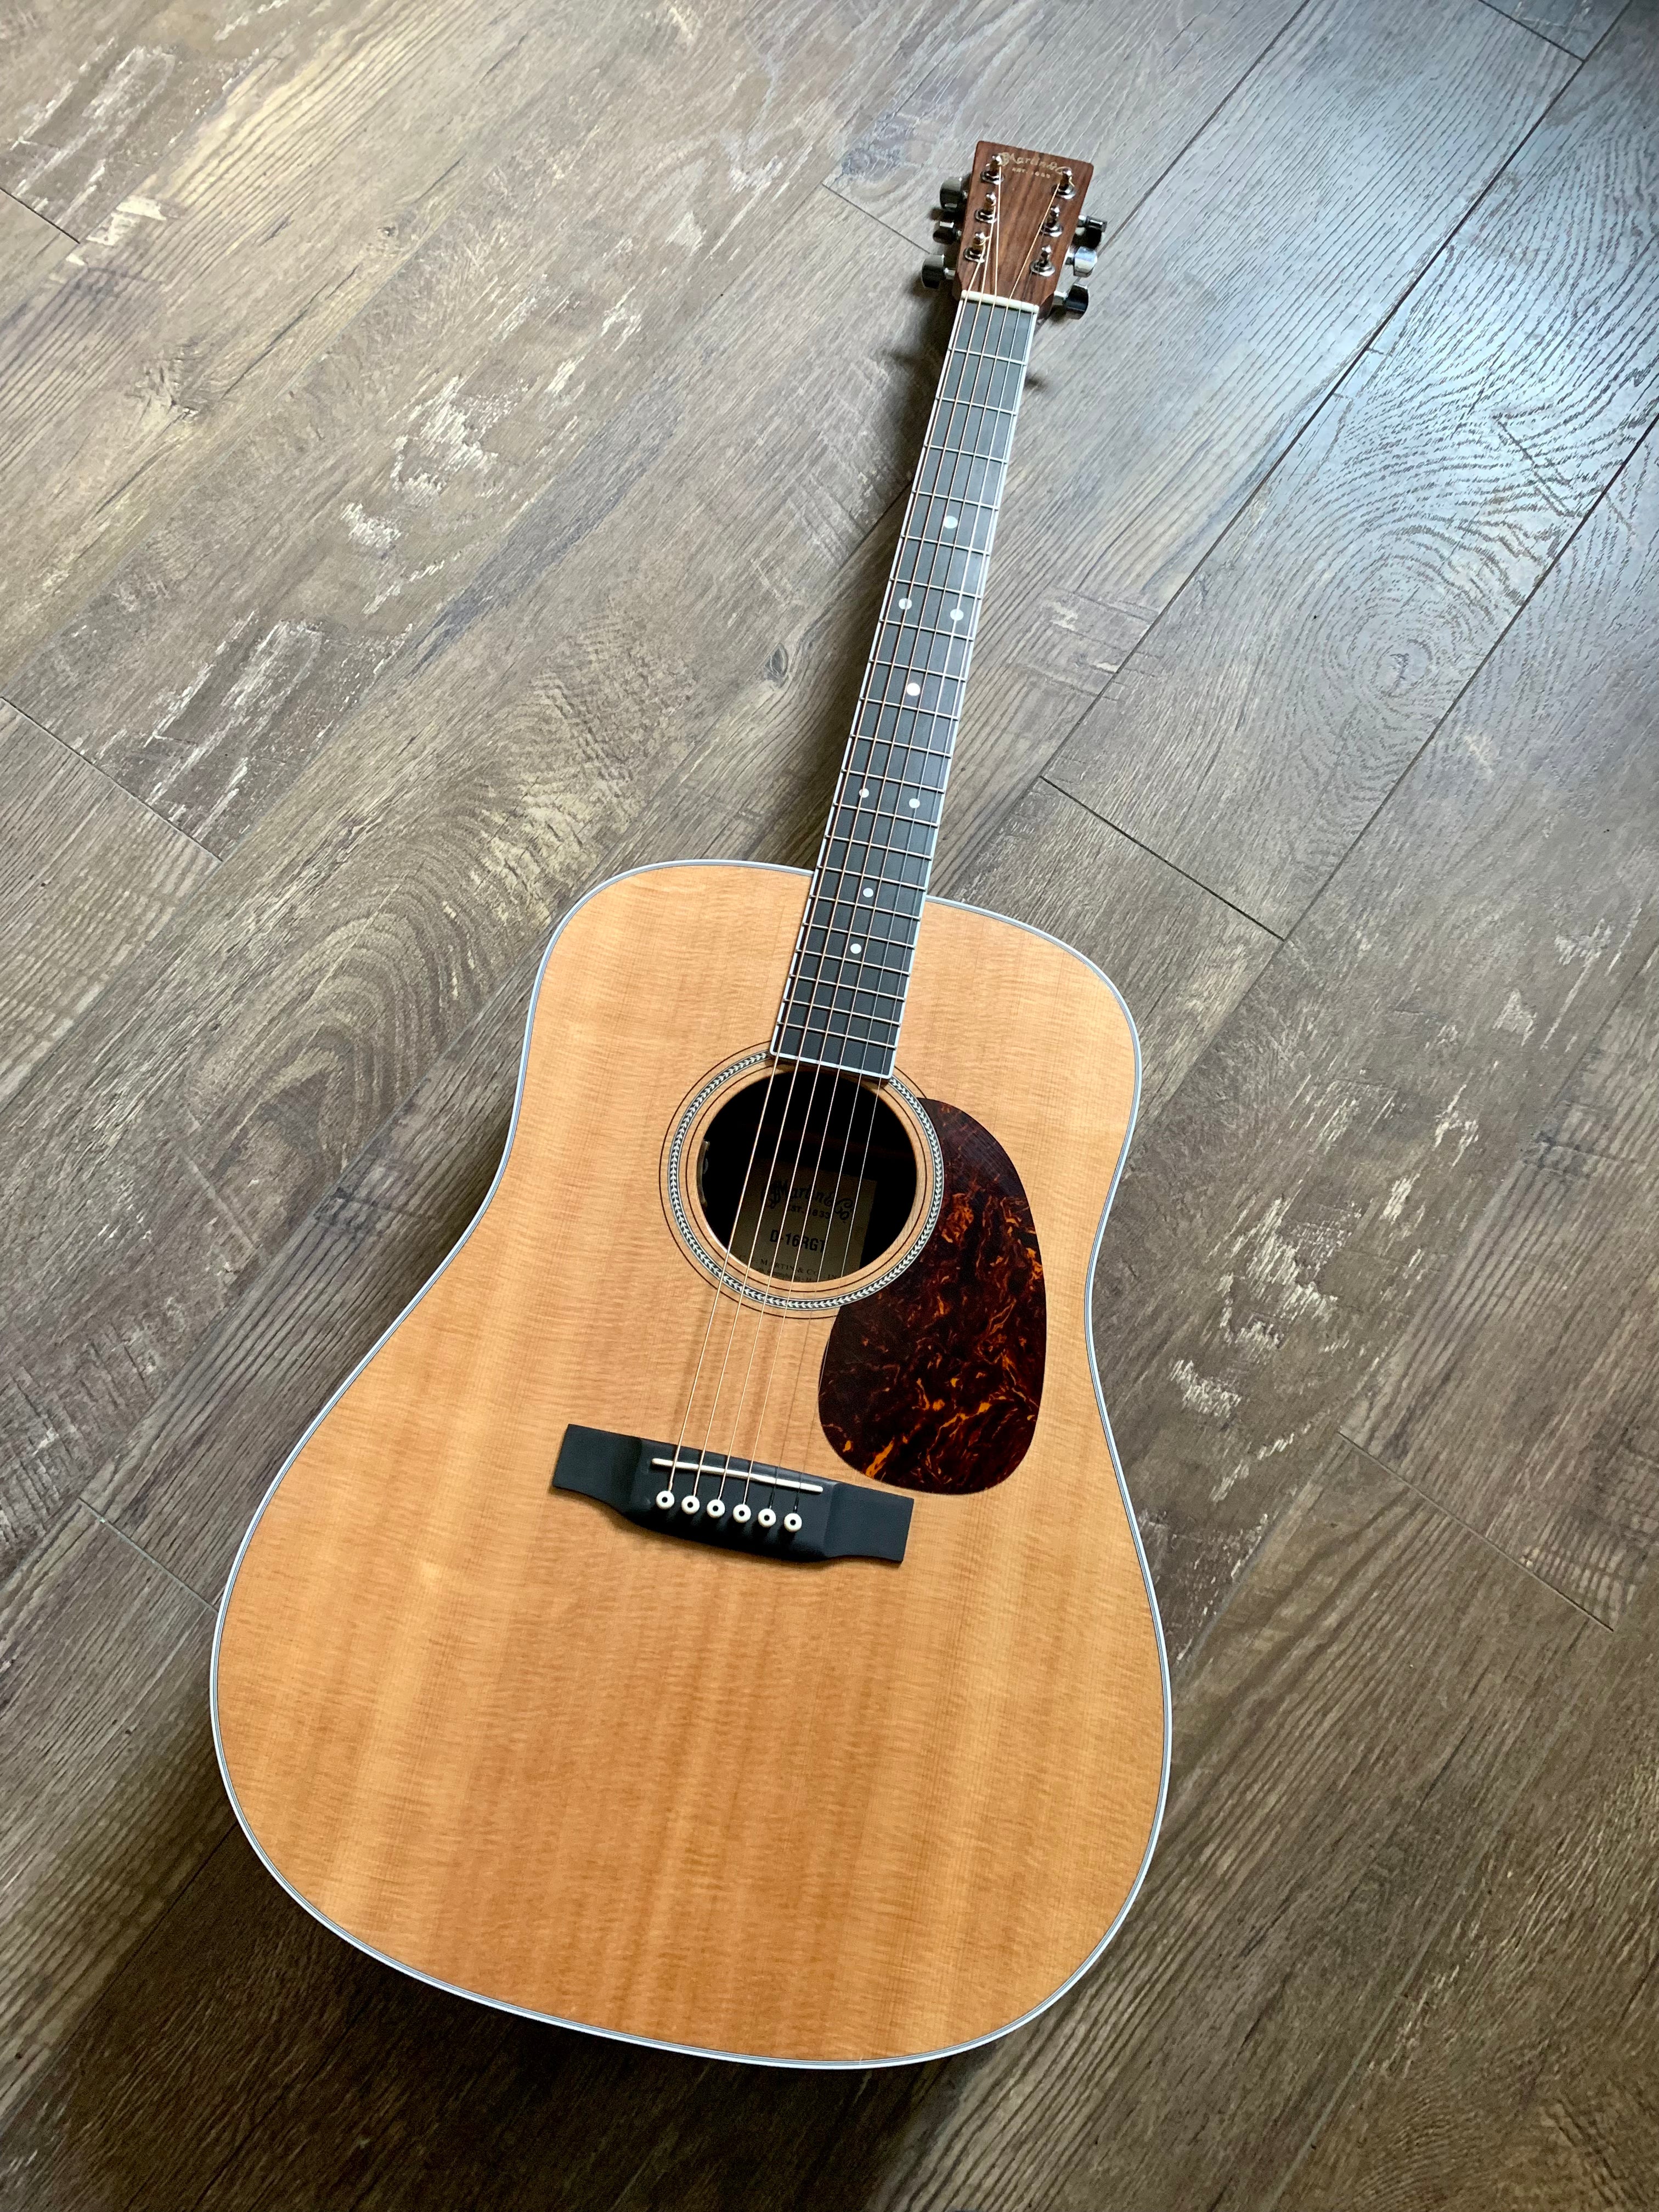 Used acoustic guitars: vintage, demo, trade in and consignment